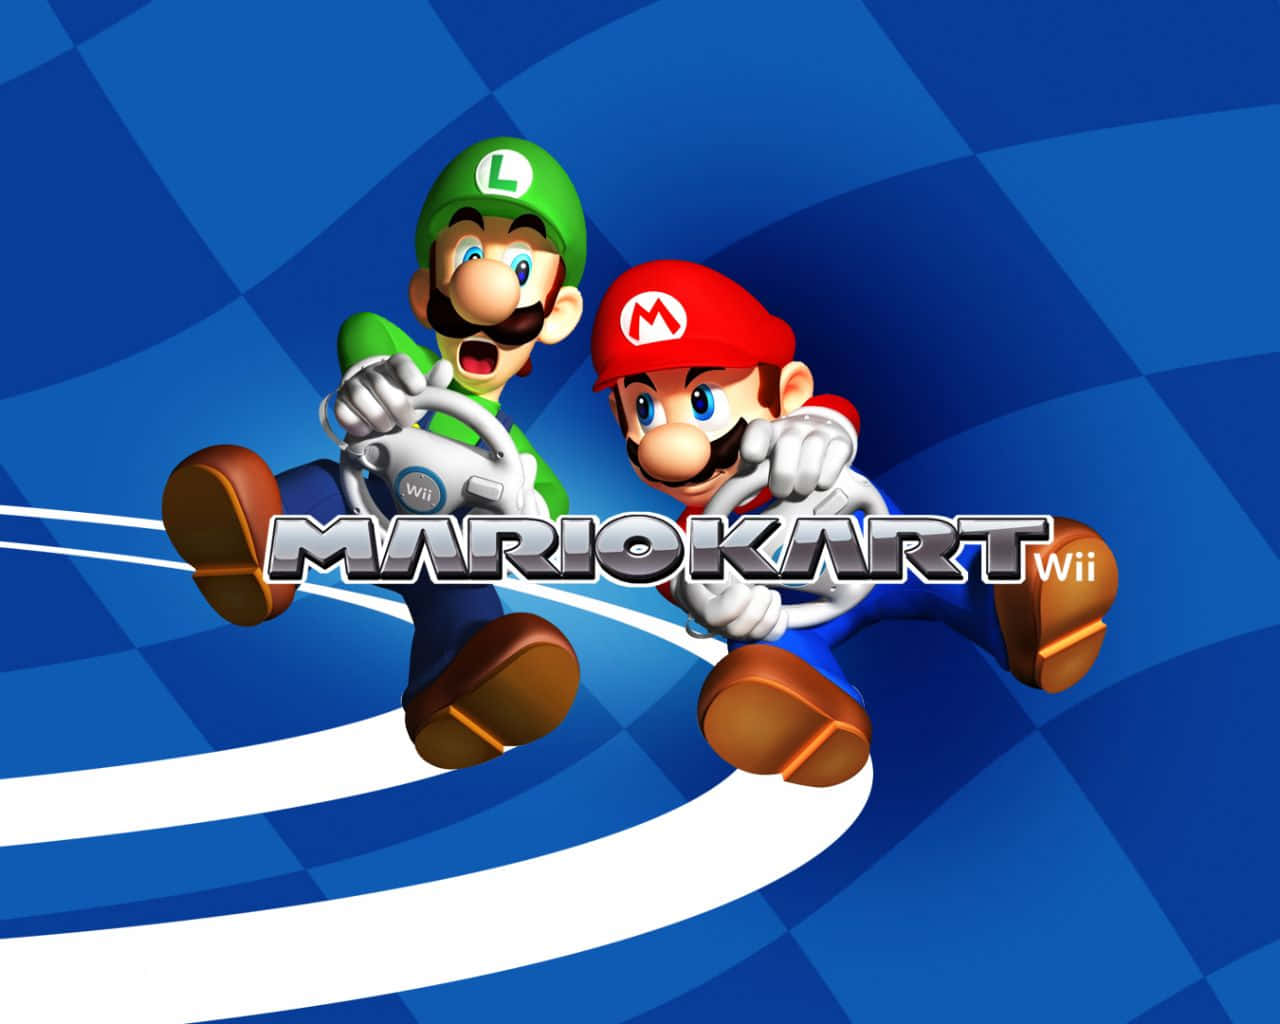 "Race against your friends with Mario Kart!"